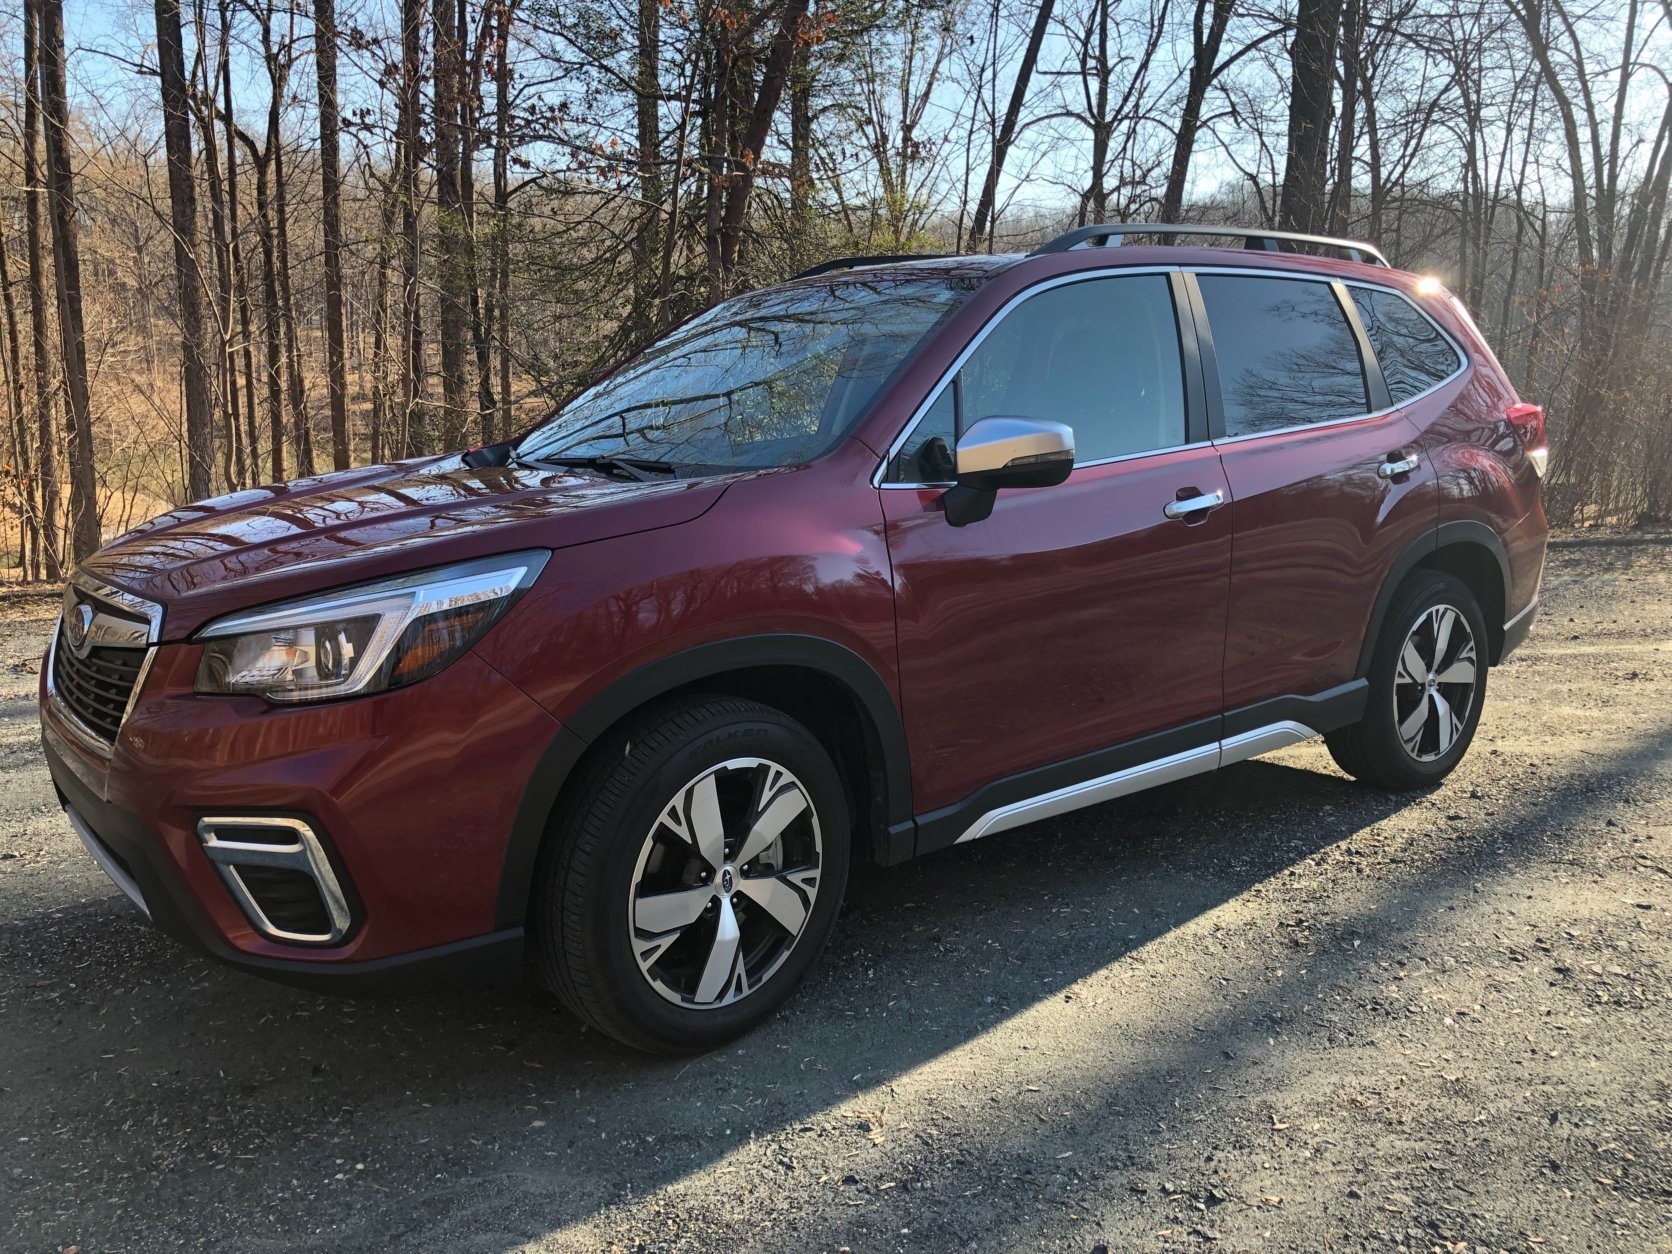 <p>This new Subaru Forester has more of an SUV look than the larger, taller wagon from before. It’s not a huge change but a more squared and chiseled — a more rugged appearance.</p>
<p>It’s still a bit more car-like than full on SUV and its welcome for some who want all capability and size without hulking size. The Forester sits up high but it doesn’t seem very tall and cumbersome like some other compact crossovers.</p>
<p>The SUV look carries forward with lower body cladding in black and silver adding a rough-and-ready, hit-the-trail style. It contrasts well with the Crimson Red pearl paint.</p>
<p>Added convenience with a roof rack expands storage options.</p>
